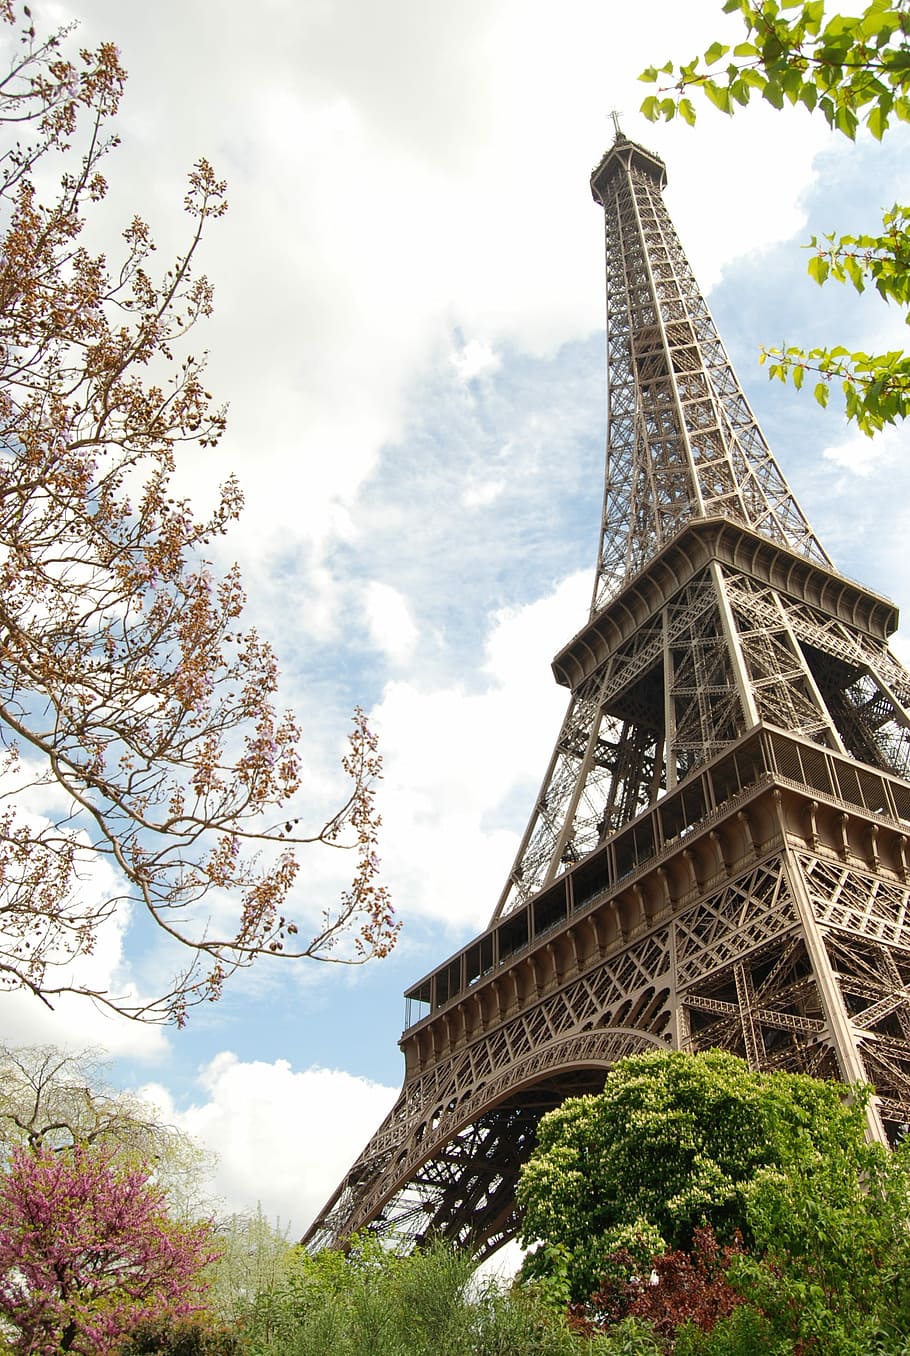 Paris, Eiffel Tower, Monuments, France, capital, city of light, reference point, tree, cloud - sky, travel destinations